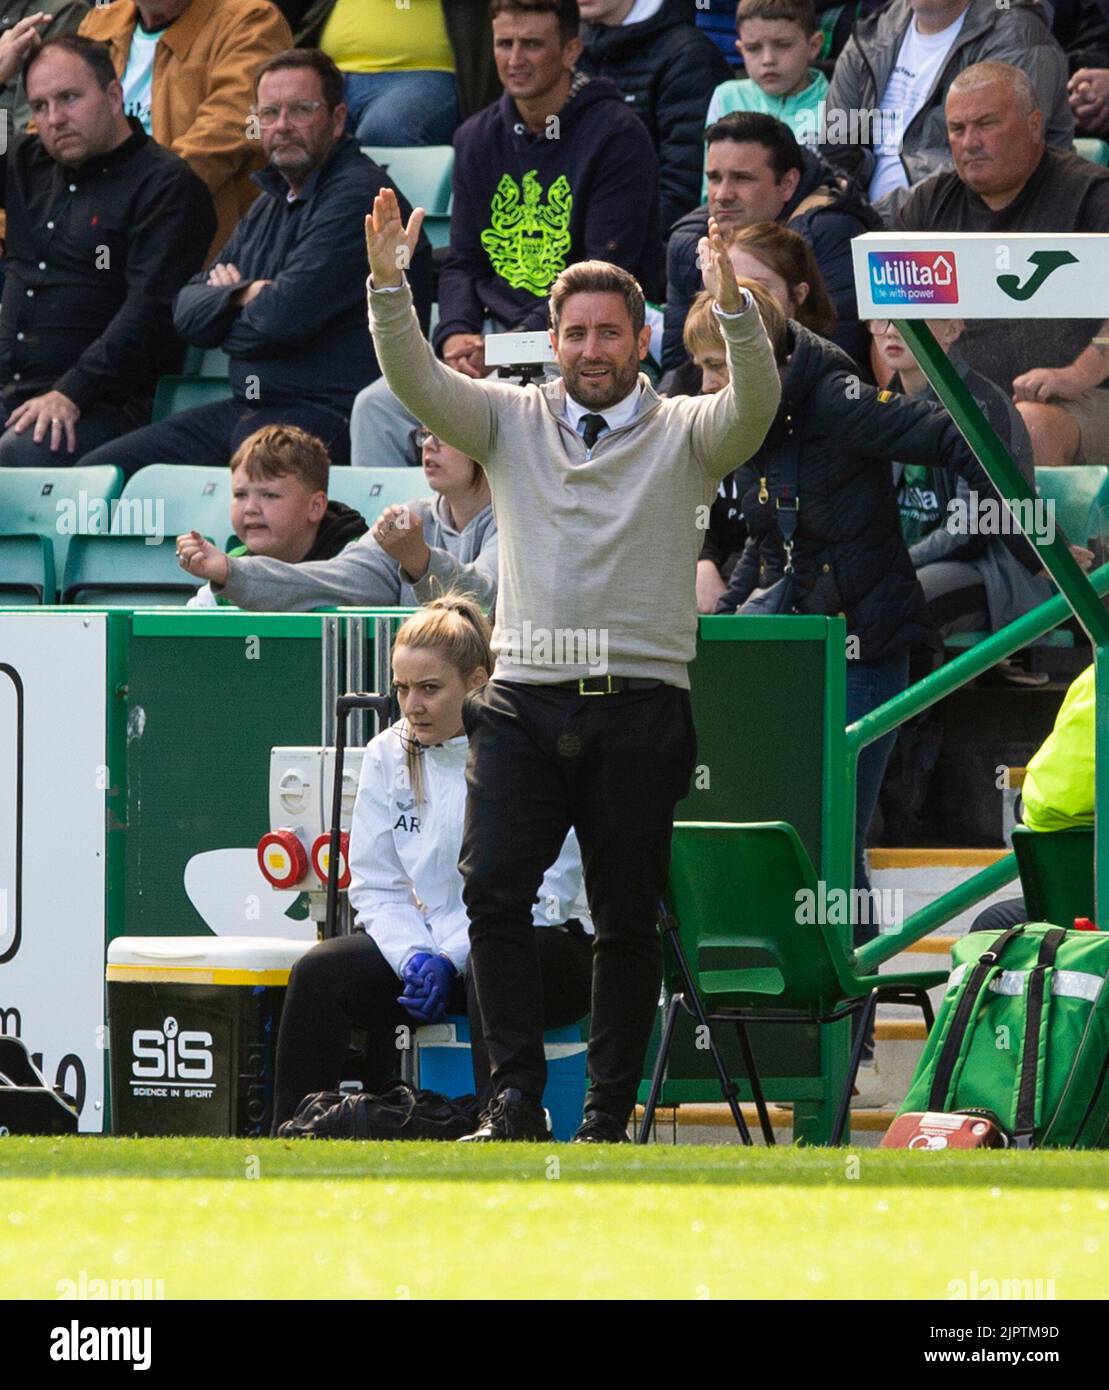 Edinburgh, UK. 20th Aug, 2022. Cinch Premiership - Hibernian v Rangers. 20/08/2022. Hibernian play host to Rangers in the cinch Premiership at Easter Road Stadium, Edinburgh, Midlothian, UK. Pic shows: HibsÕ manager, Lee Johnson, shouts to his players from the sidelines. Credit: Ian Jacobs/Alamy Live News Stock Photo